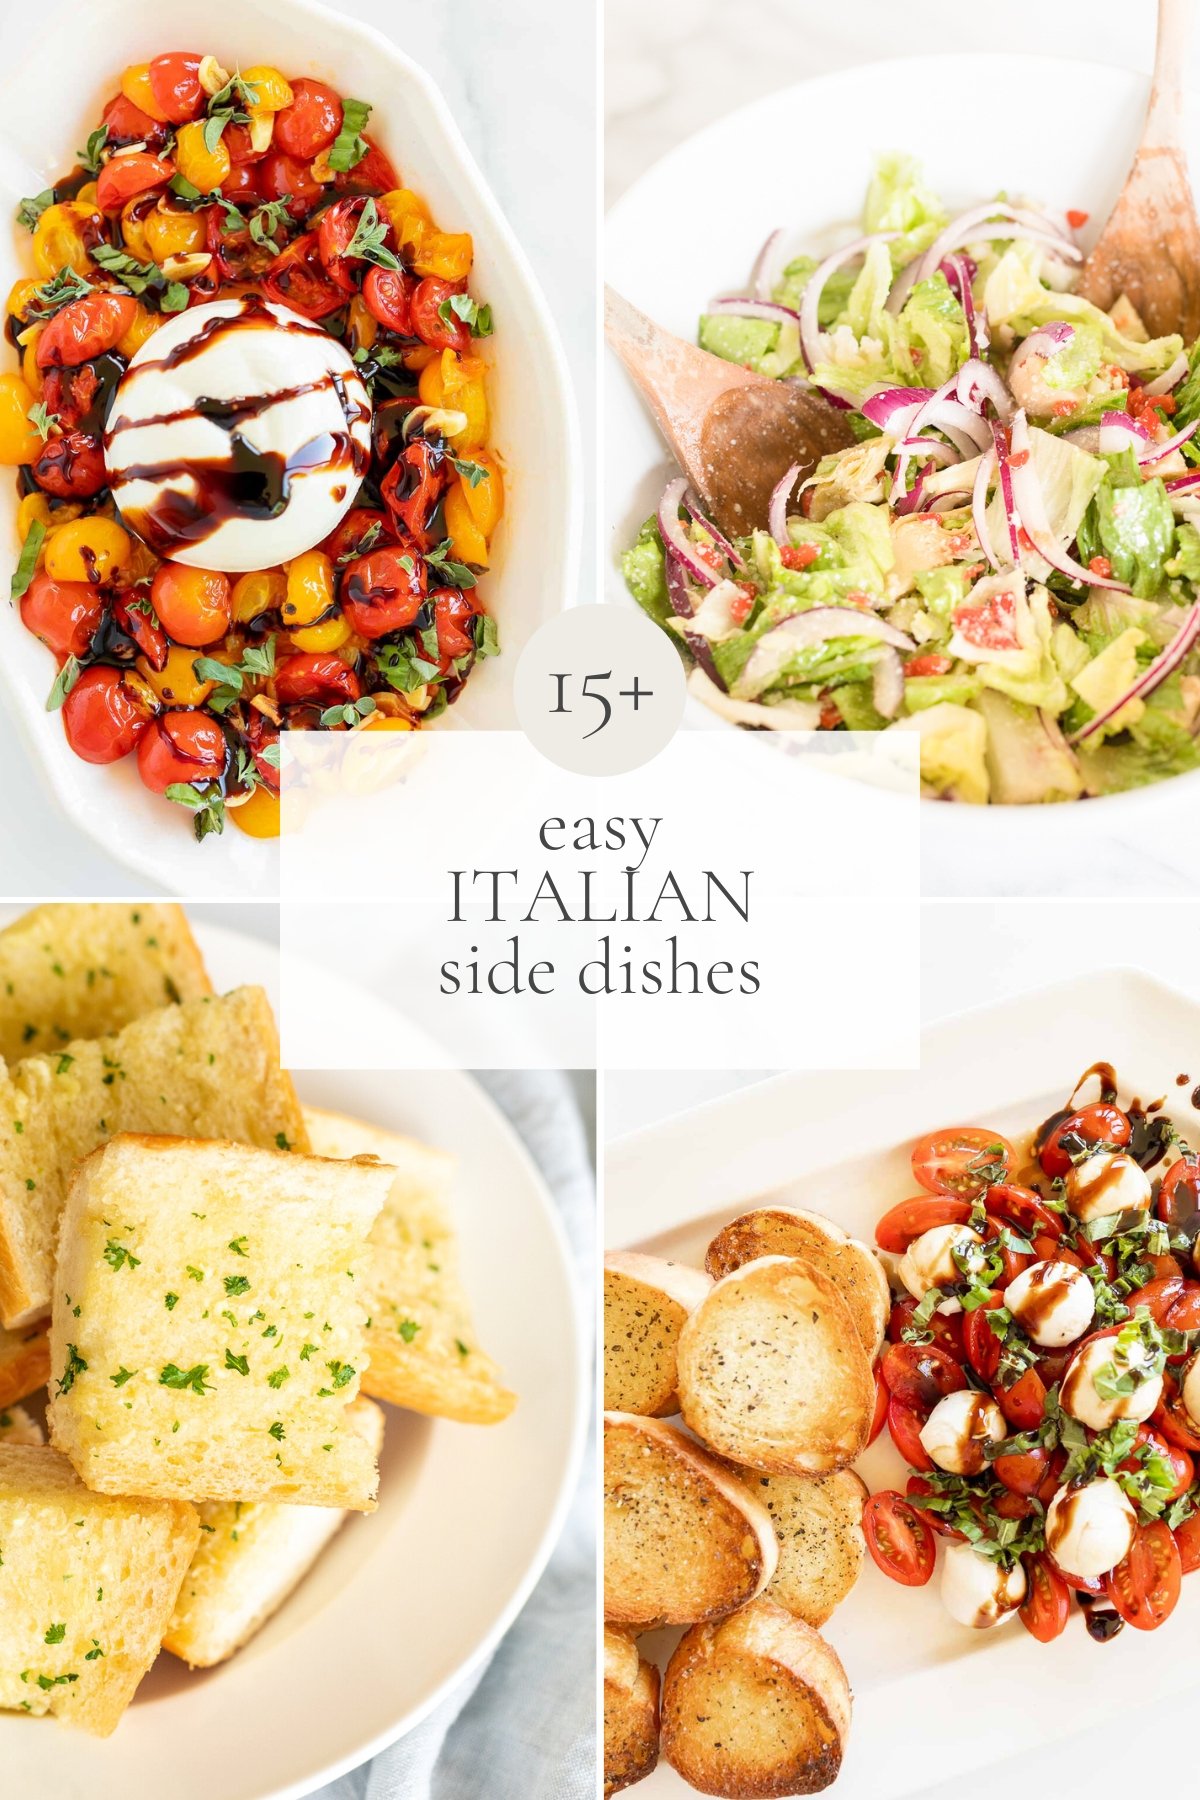 A collage of various Italian side dishes with a text overlay reading "15+ effortless Italian side dishes".